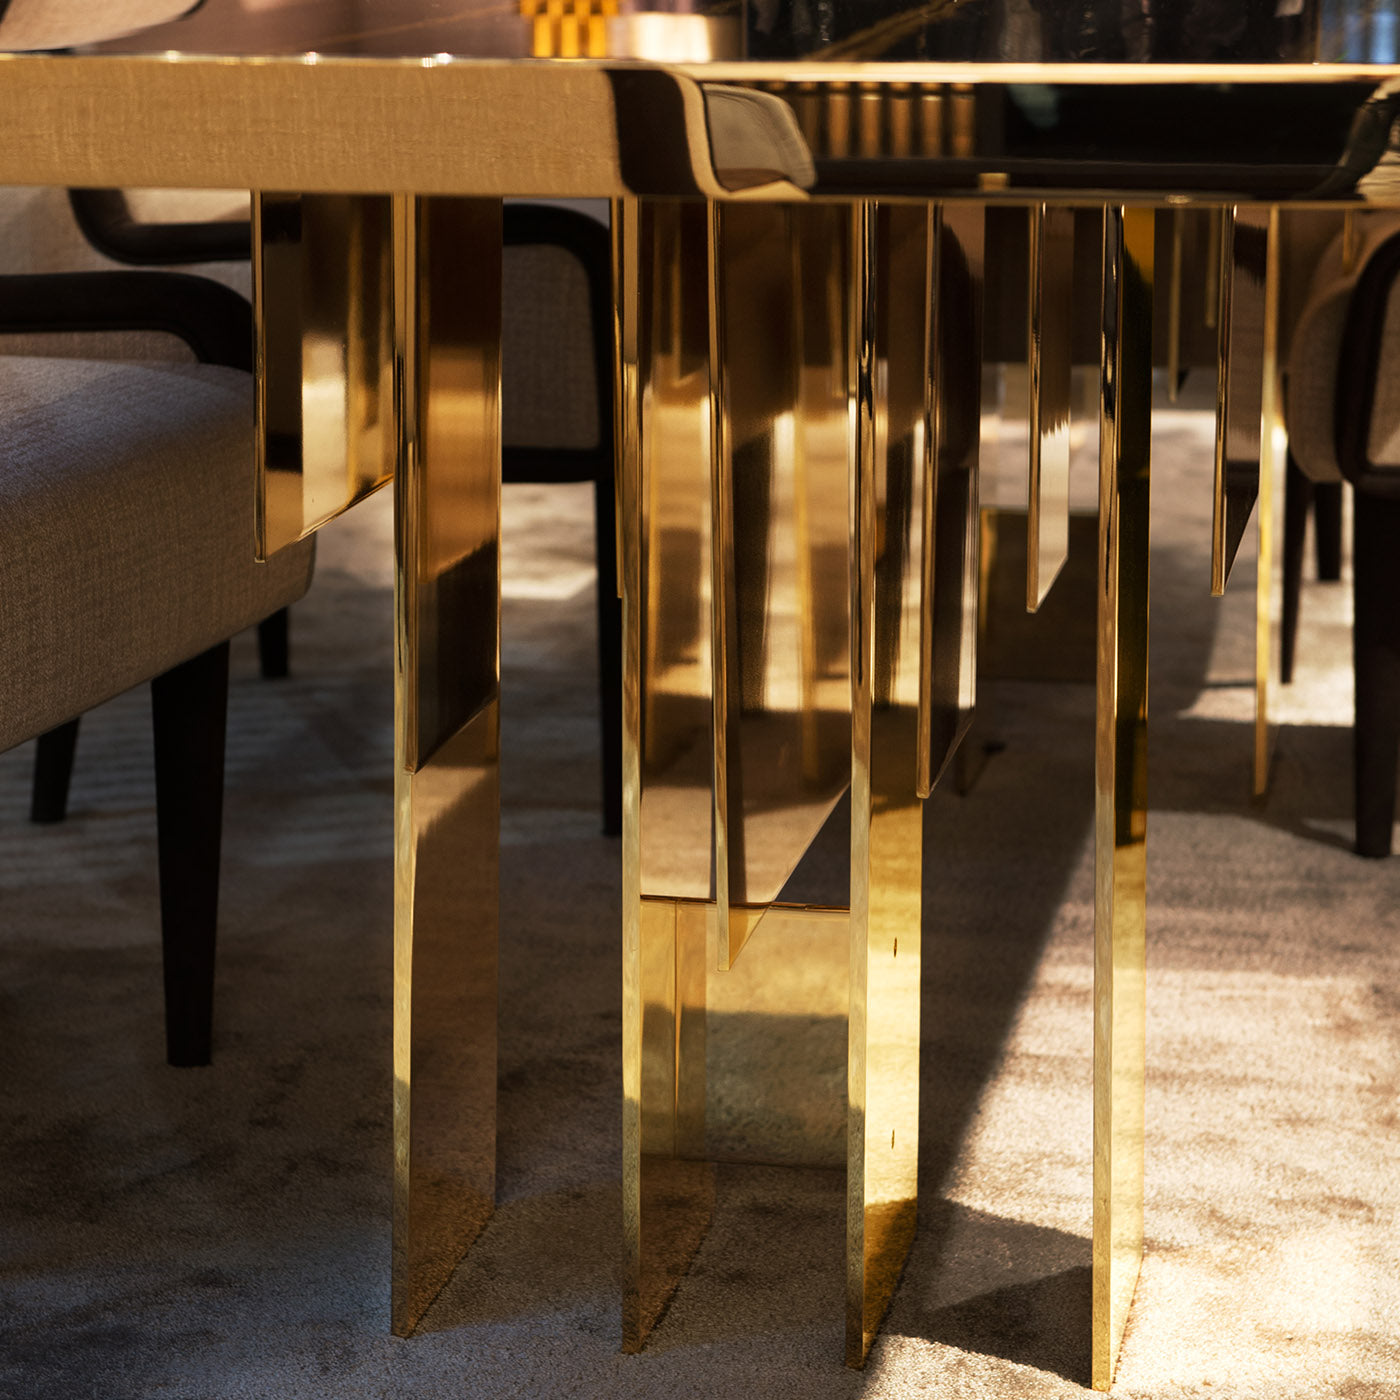 Cheviot Dining Table by Giannella Ventura - Alternative view 1